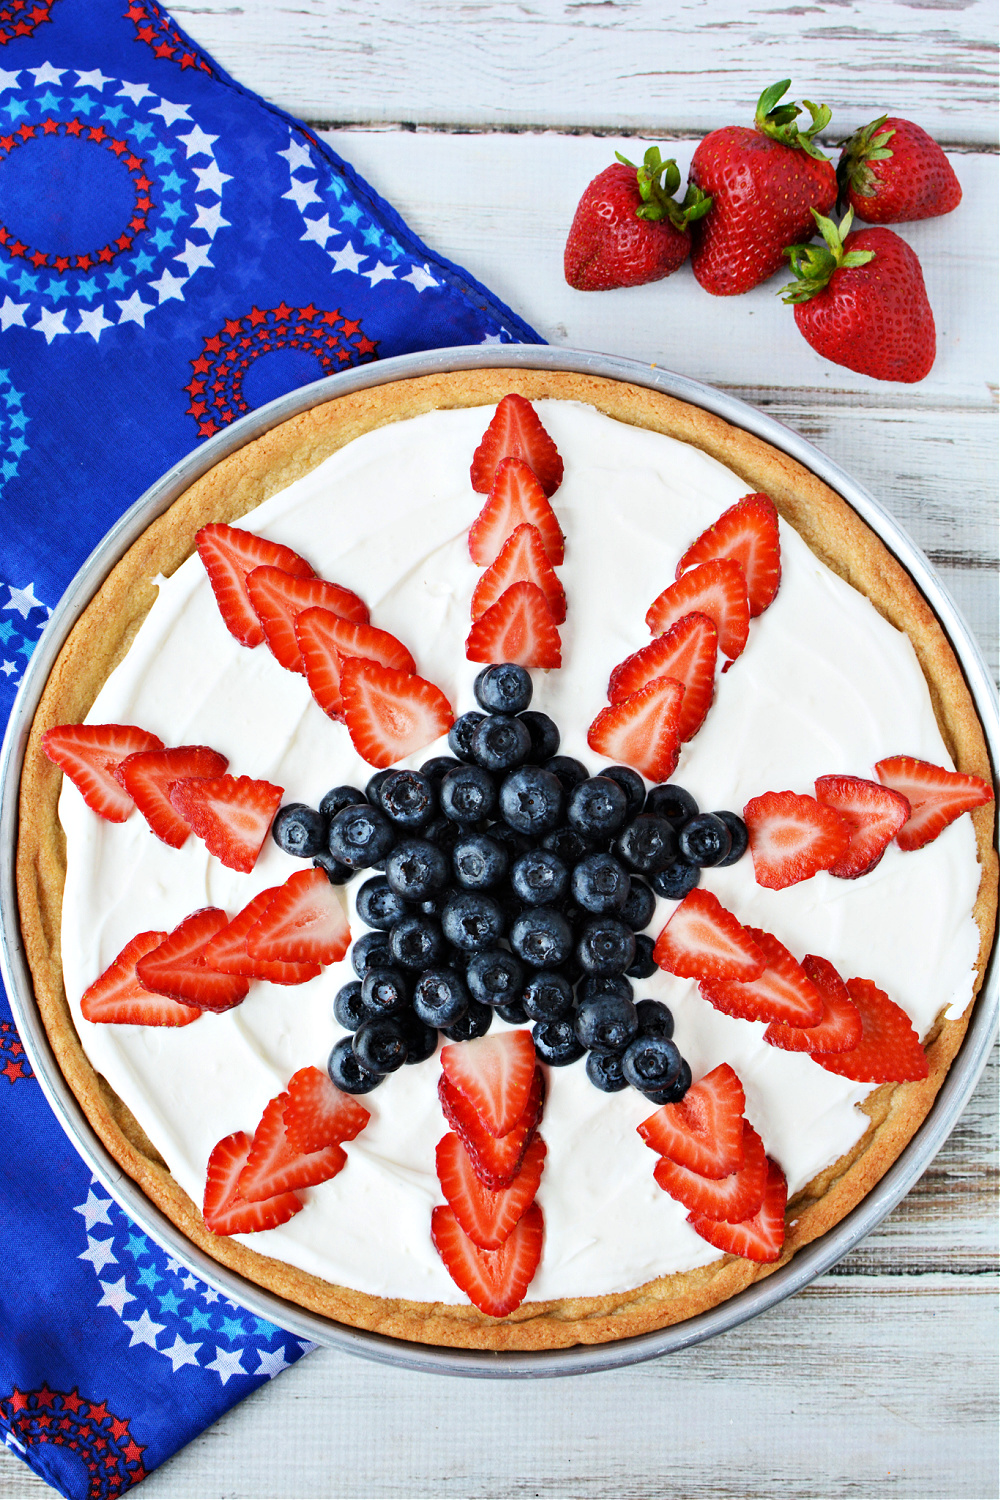 pizza made out of cookies with white whipped topping and sliced strawberries and blueberries